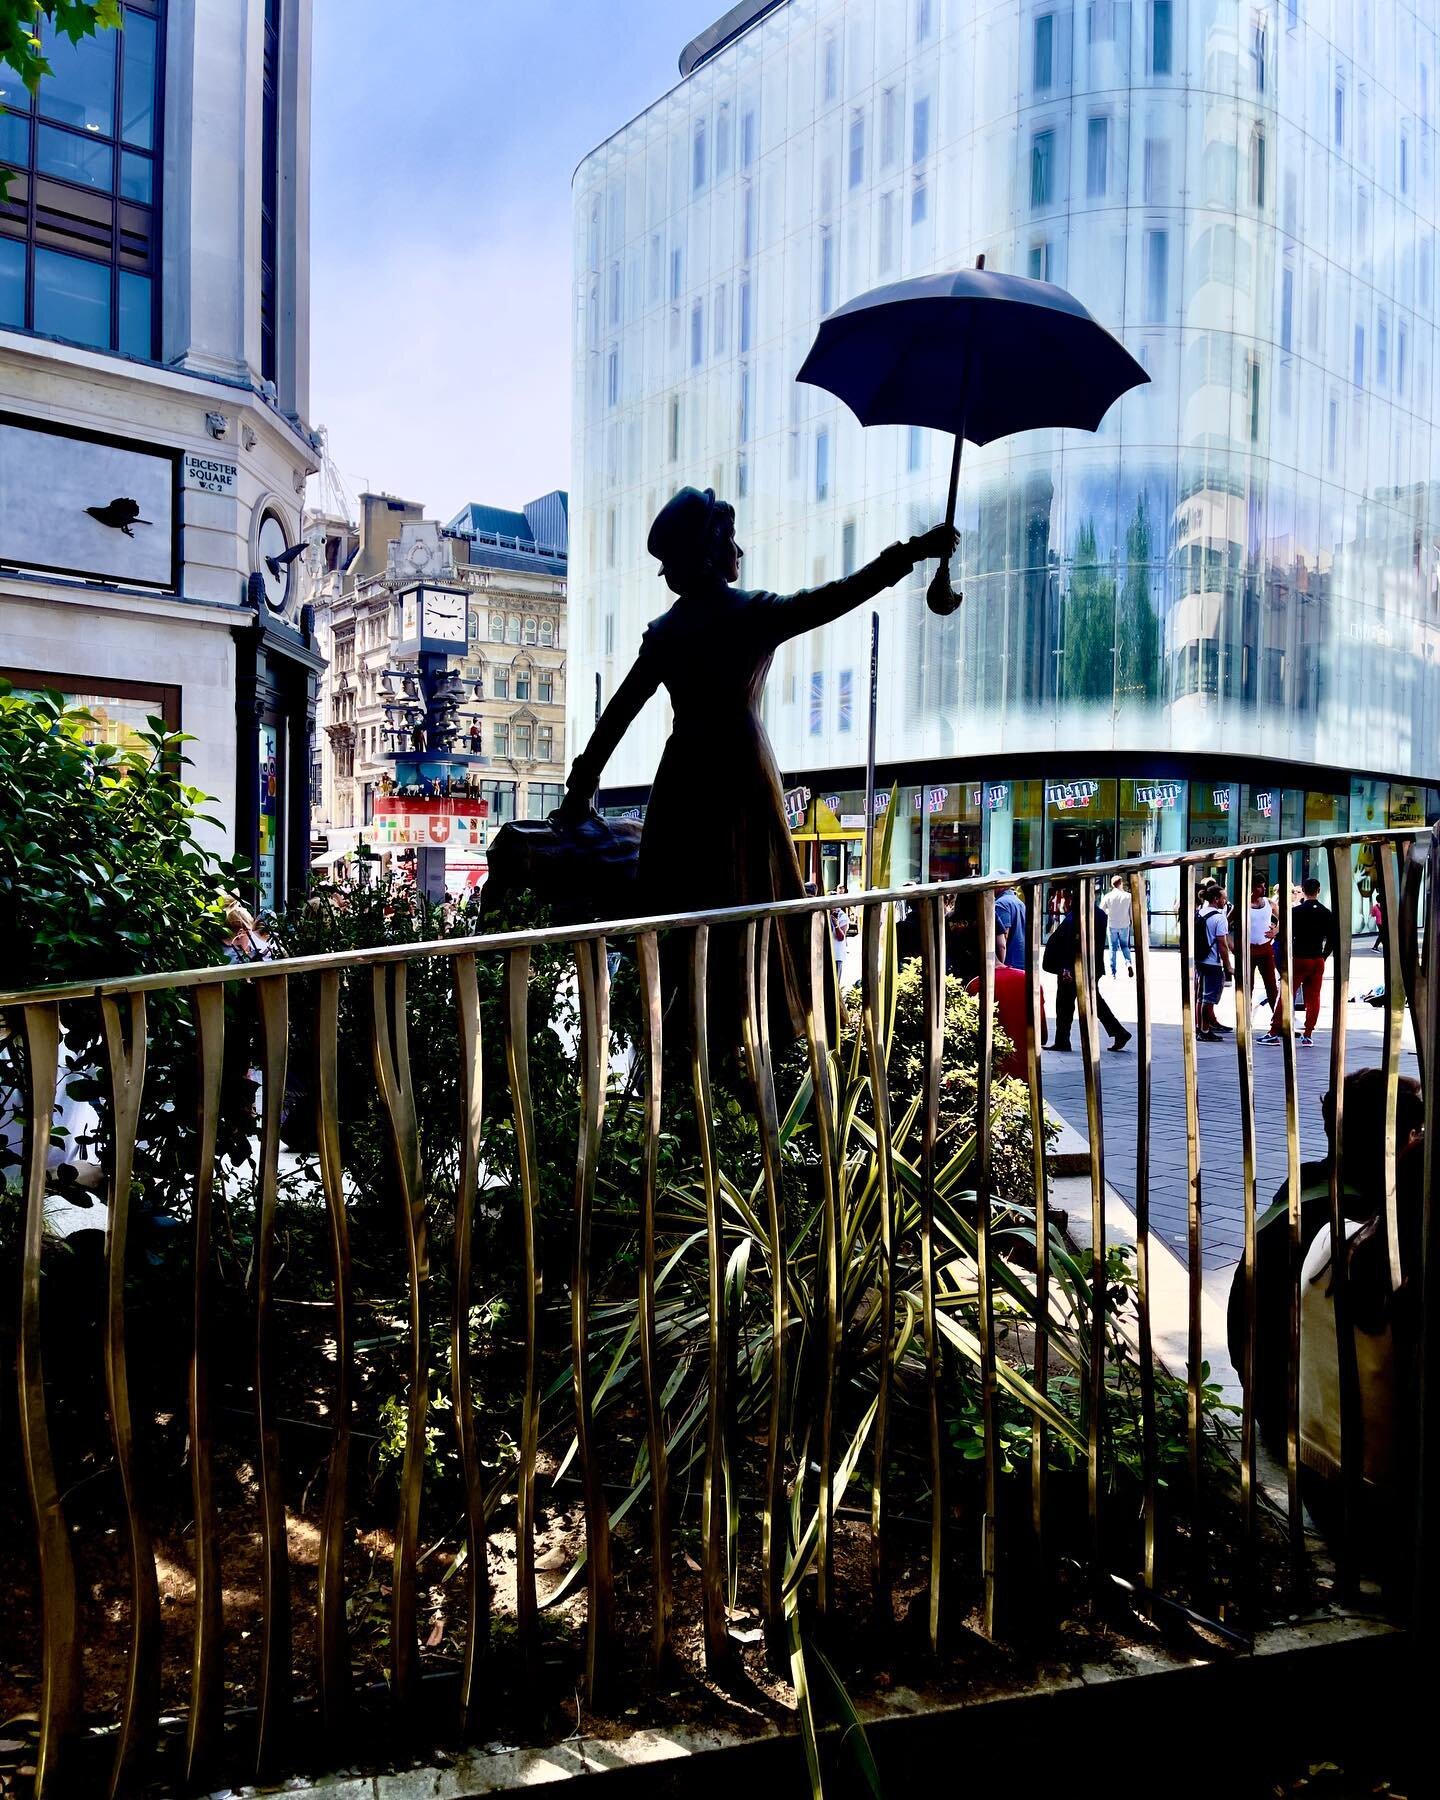 Mary Poppins sculpture in Leicester Square, London, England created by artist Samantha Wild.